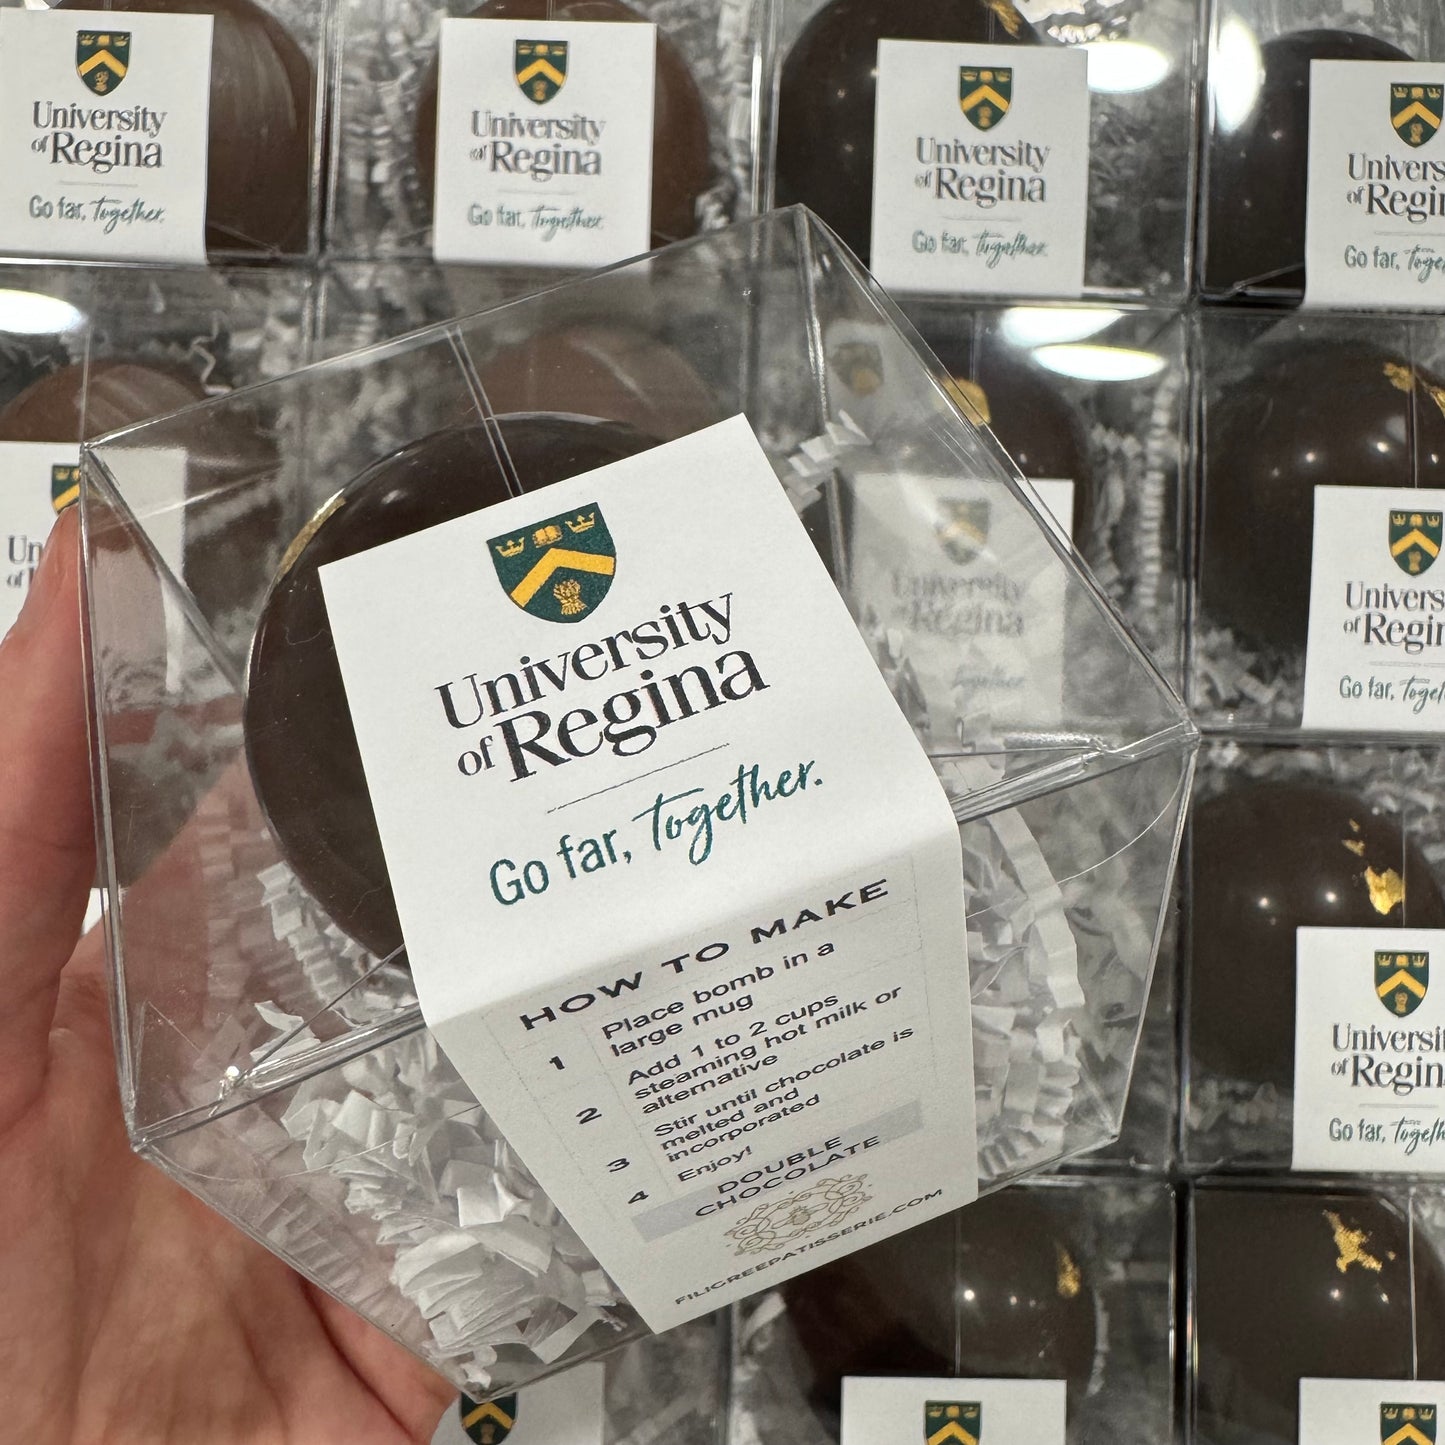 A Hot Chocolate Bomb with a sticker featuring the University of Regina logo.